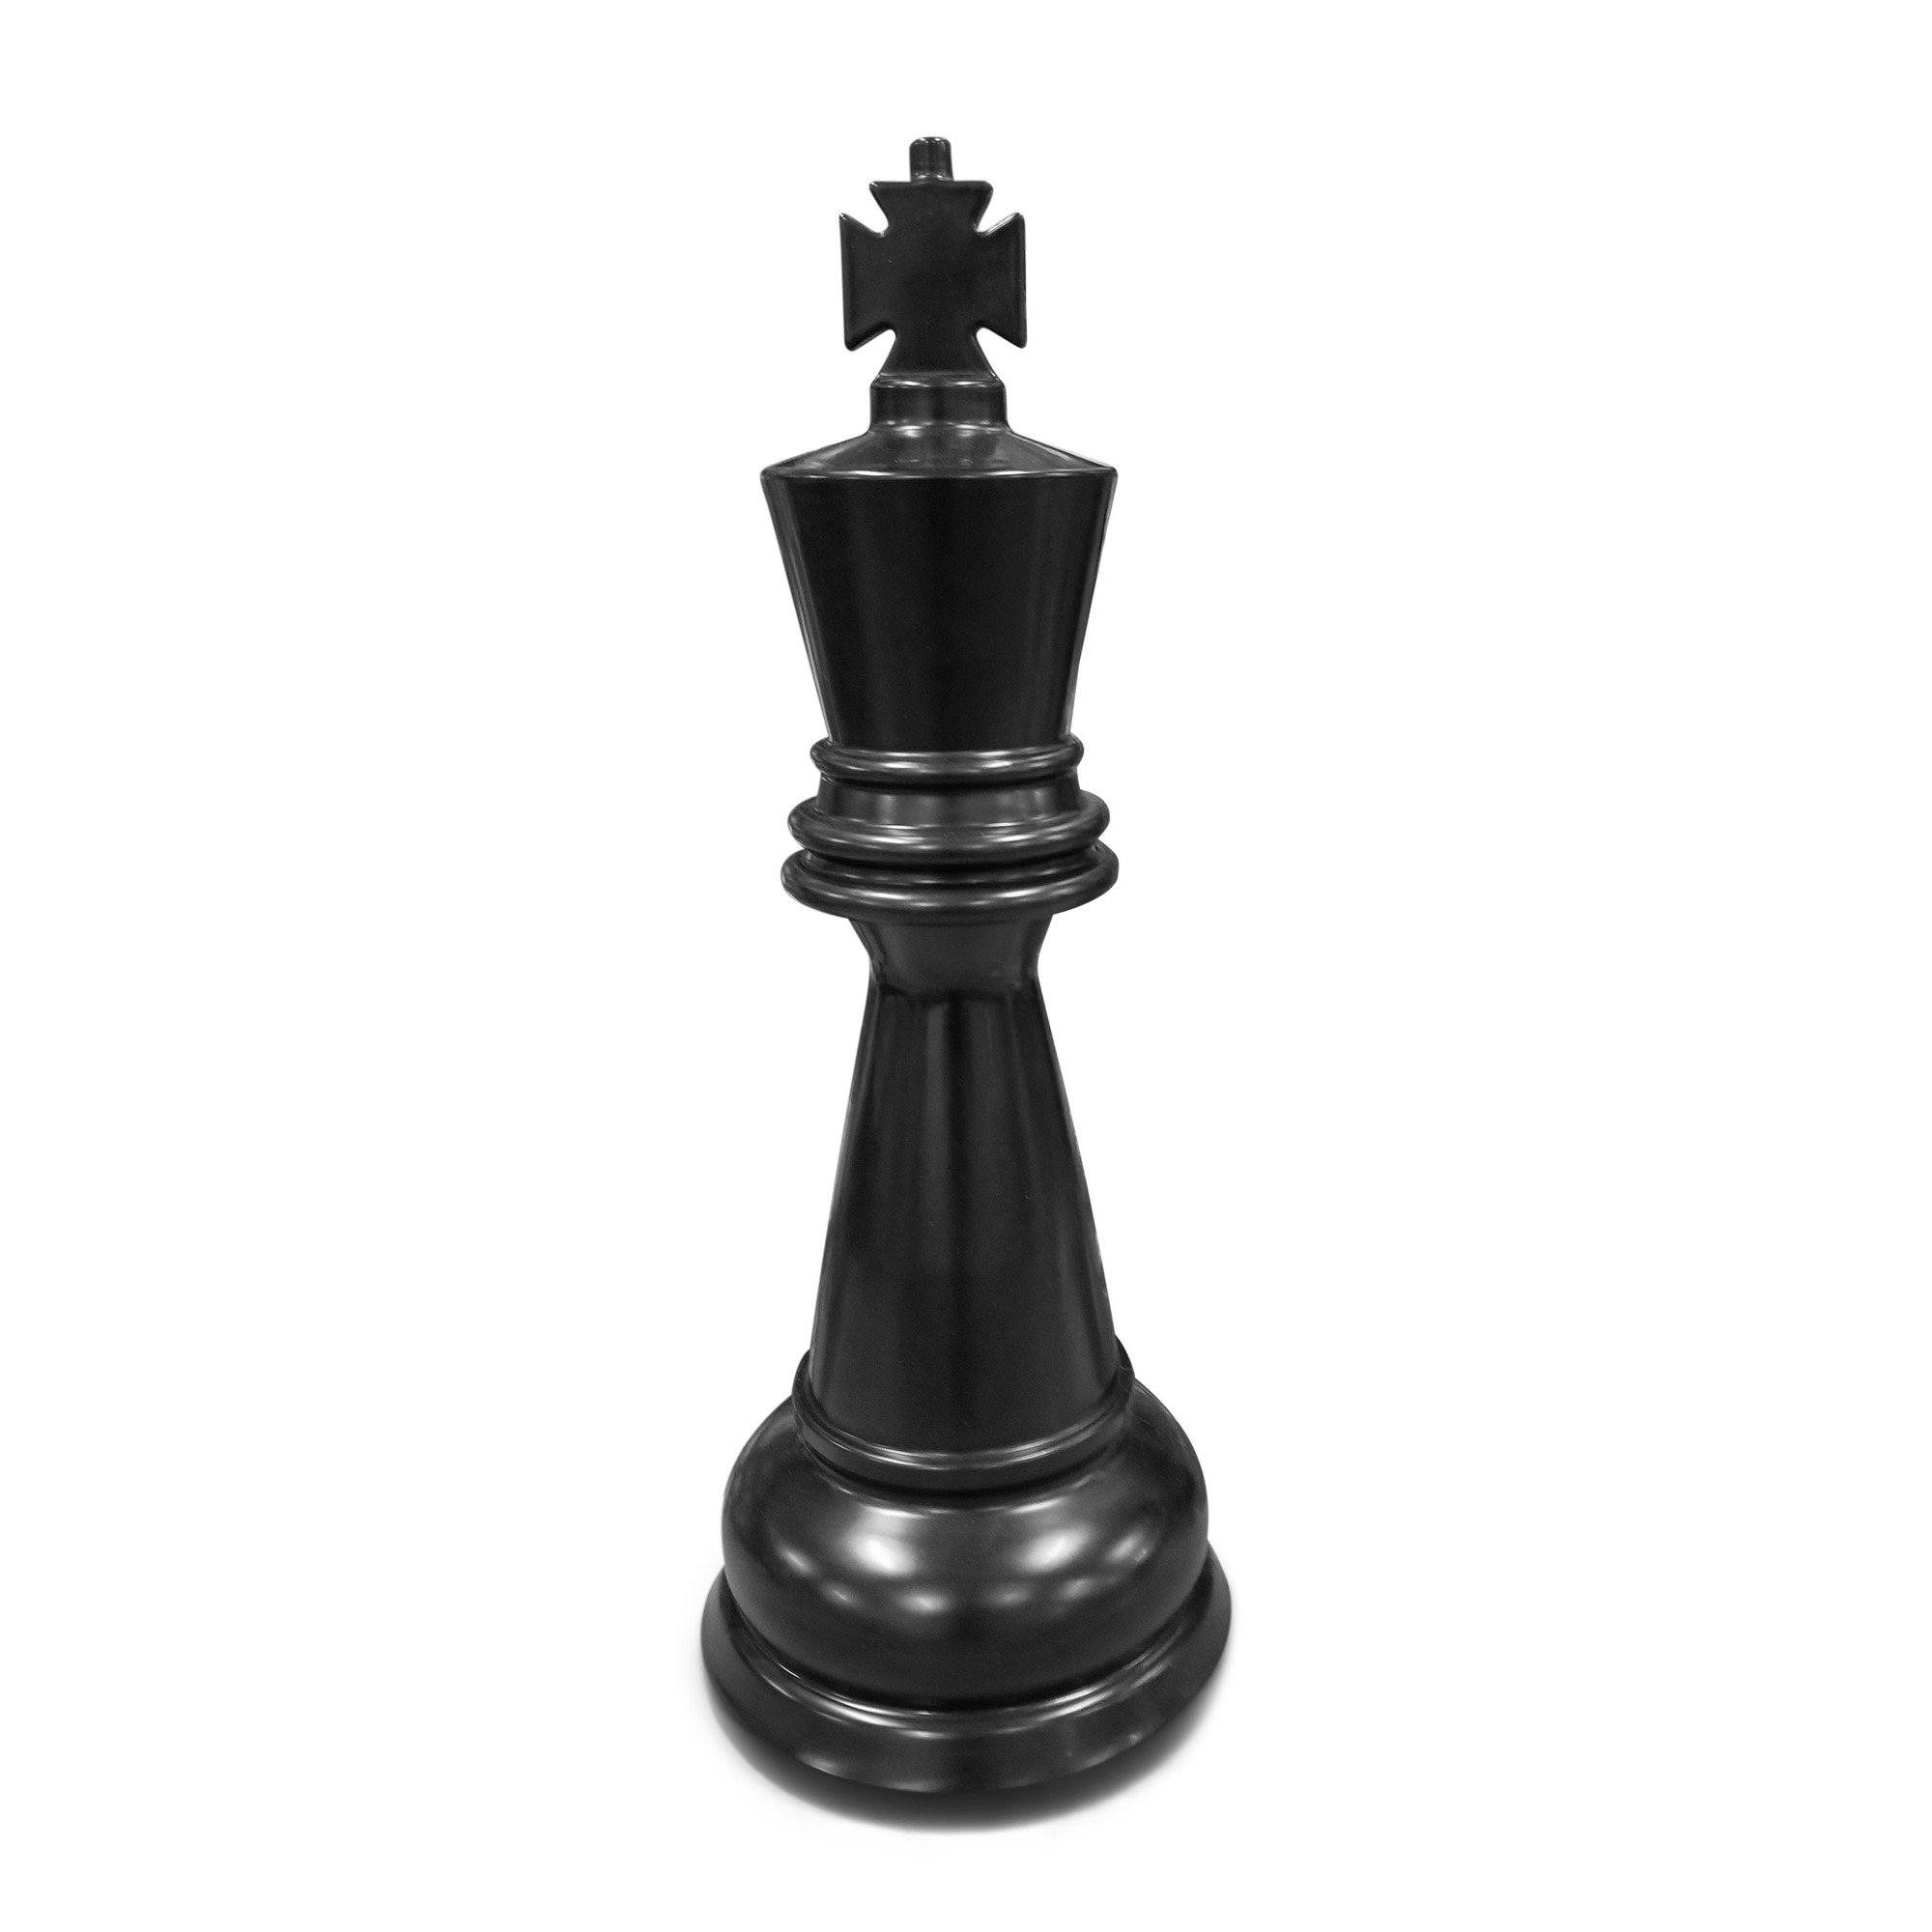 Premium Photo  Chess pieces on dark with red backlight close up